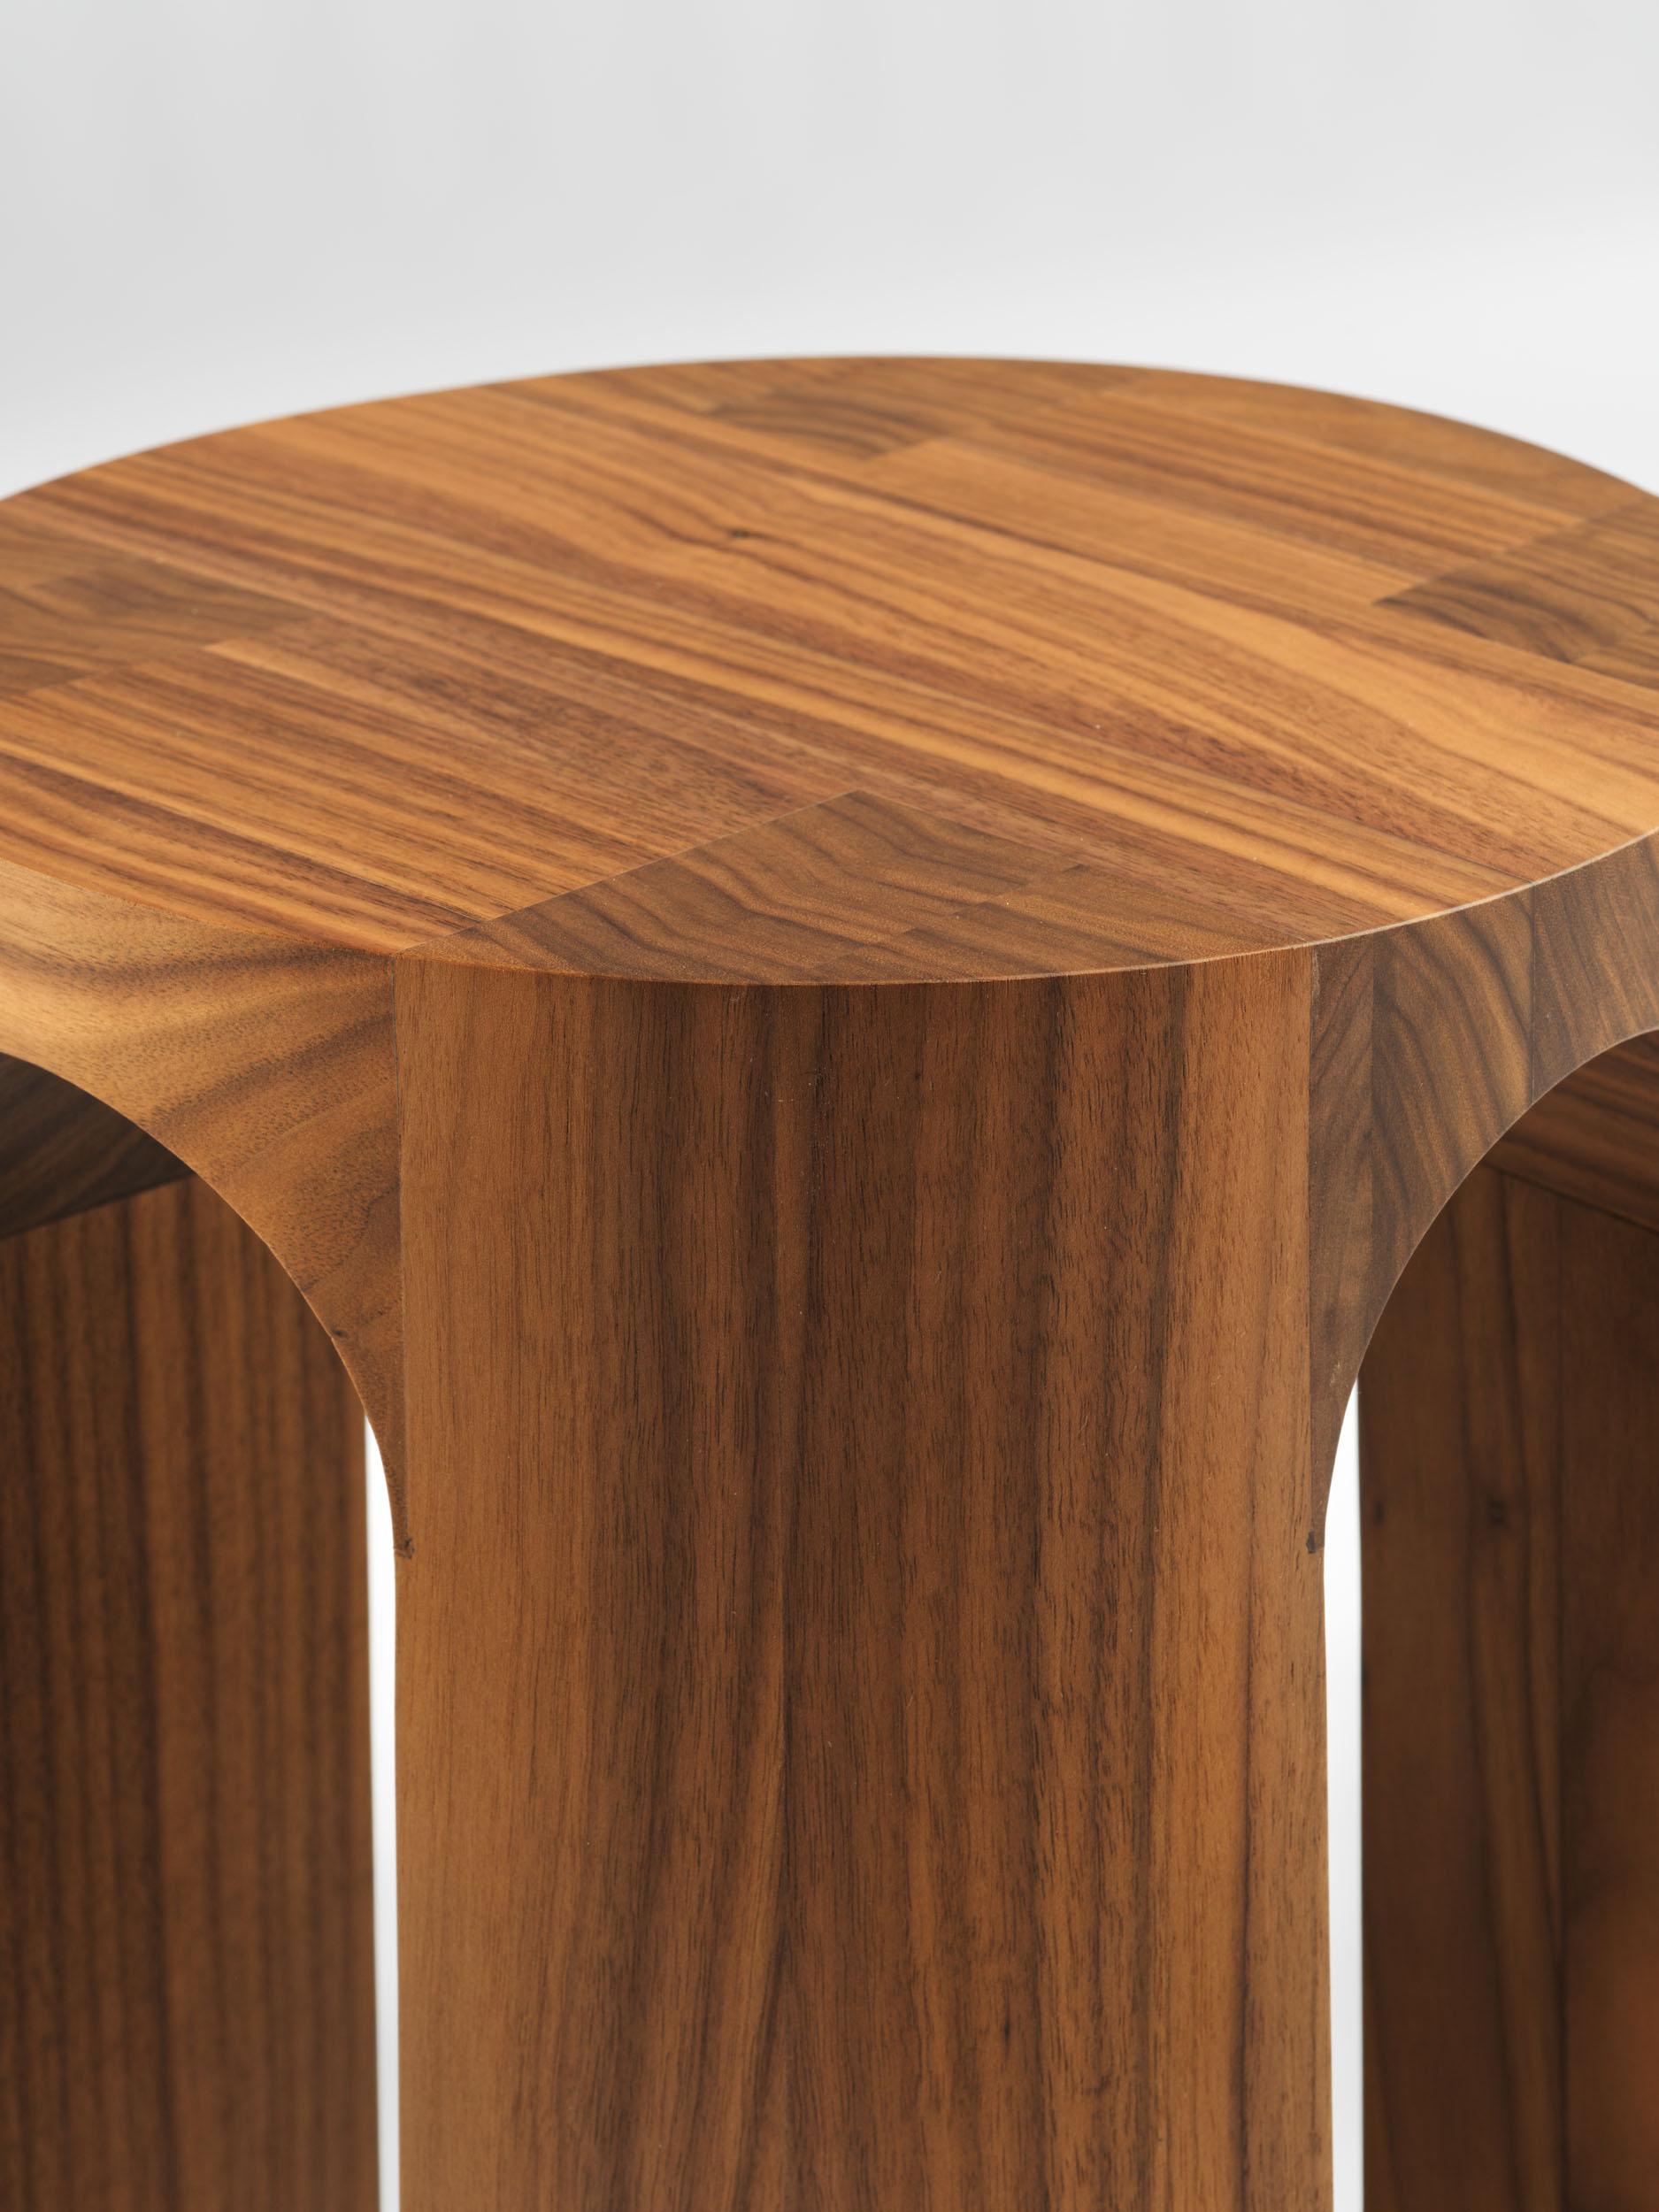 Contemporary Solid American Walnut Arcus Stool by Tim Vranken For Sale 4